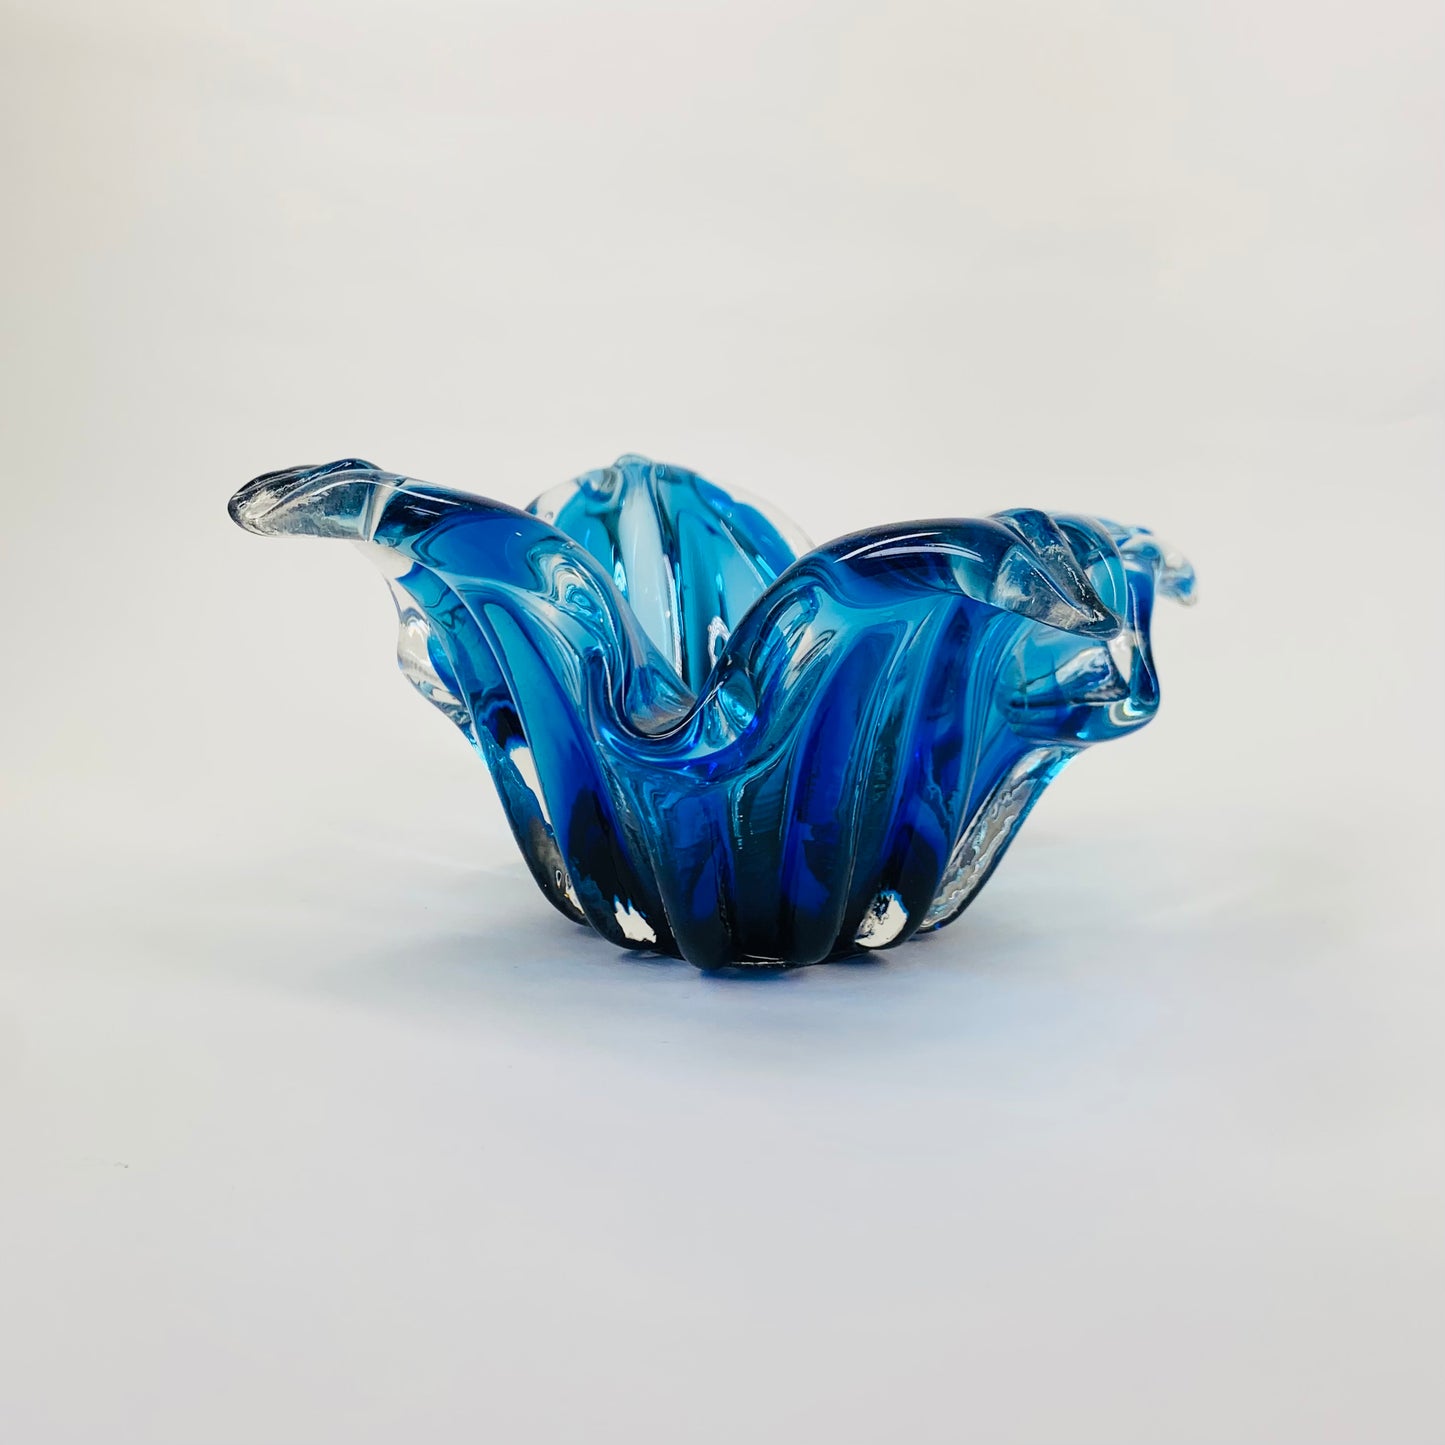 JAPANESE BLUE OMBRE PINCHED BOWL